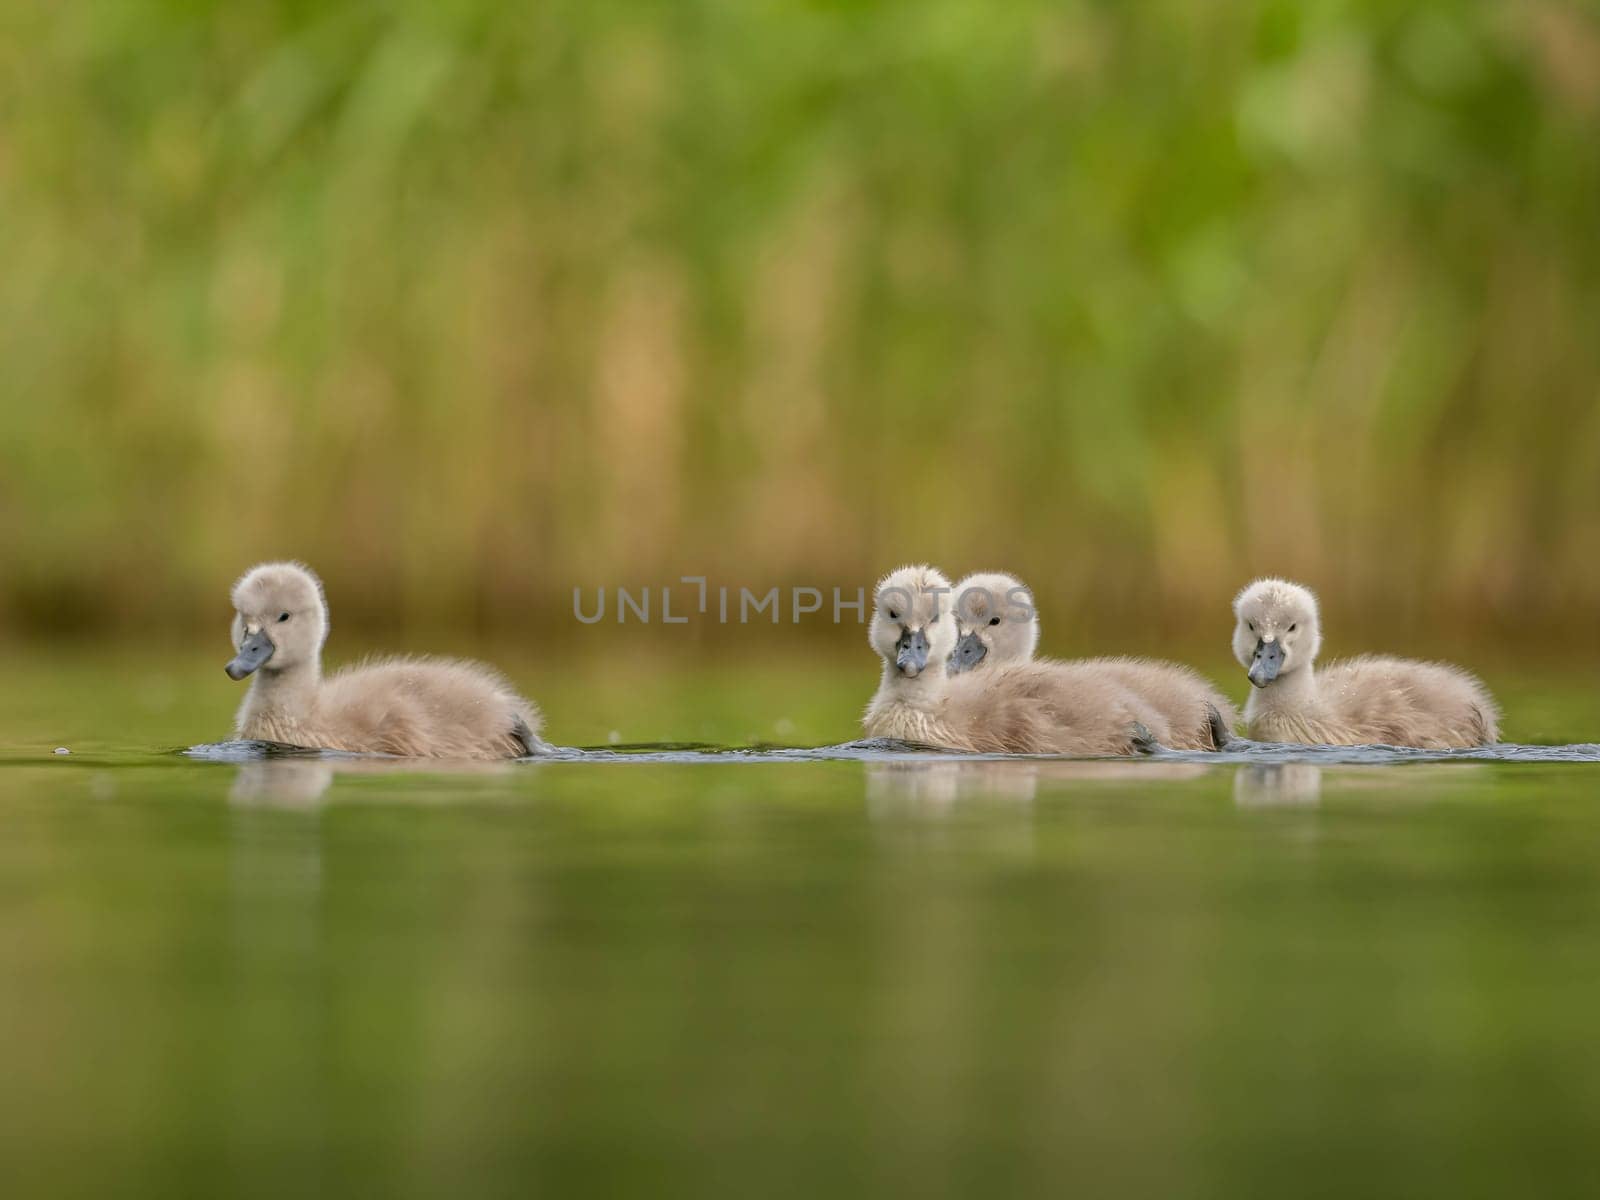 A close-up photograph captures young mute swans gracefully floating on the water amidst the soothing green scenery, portraying the serenity of nature.